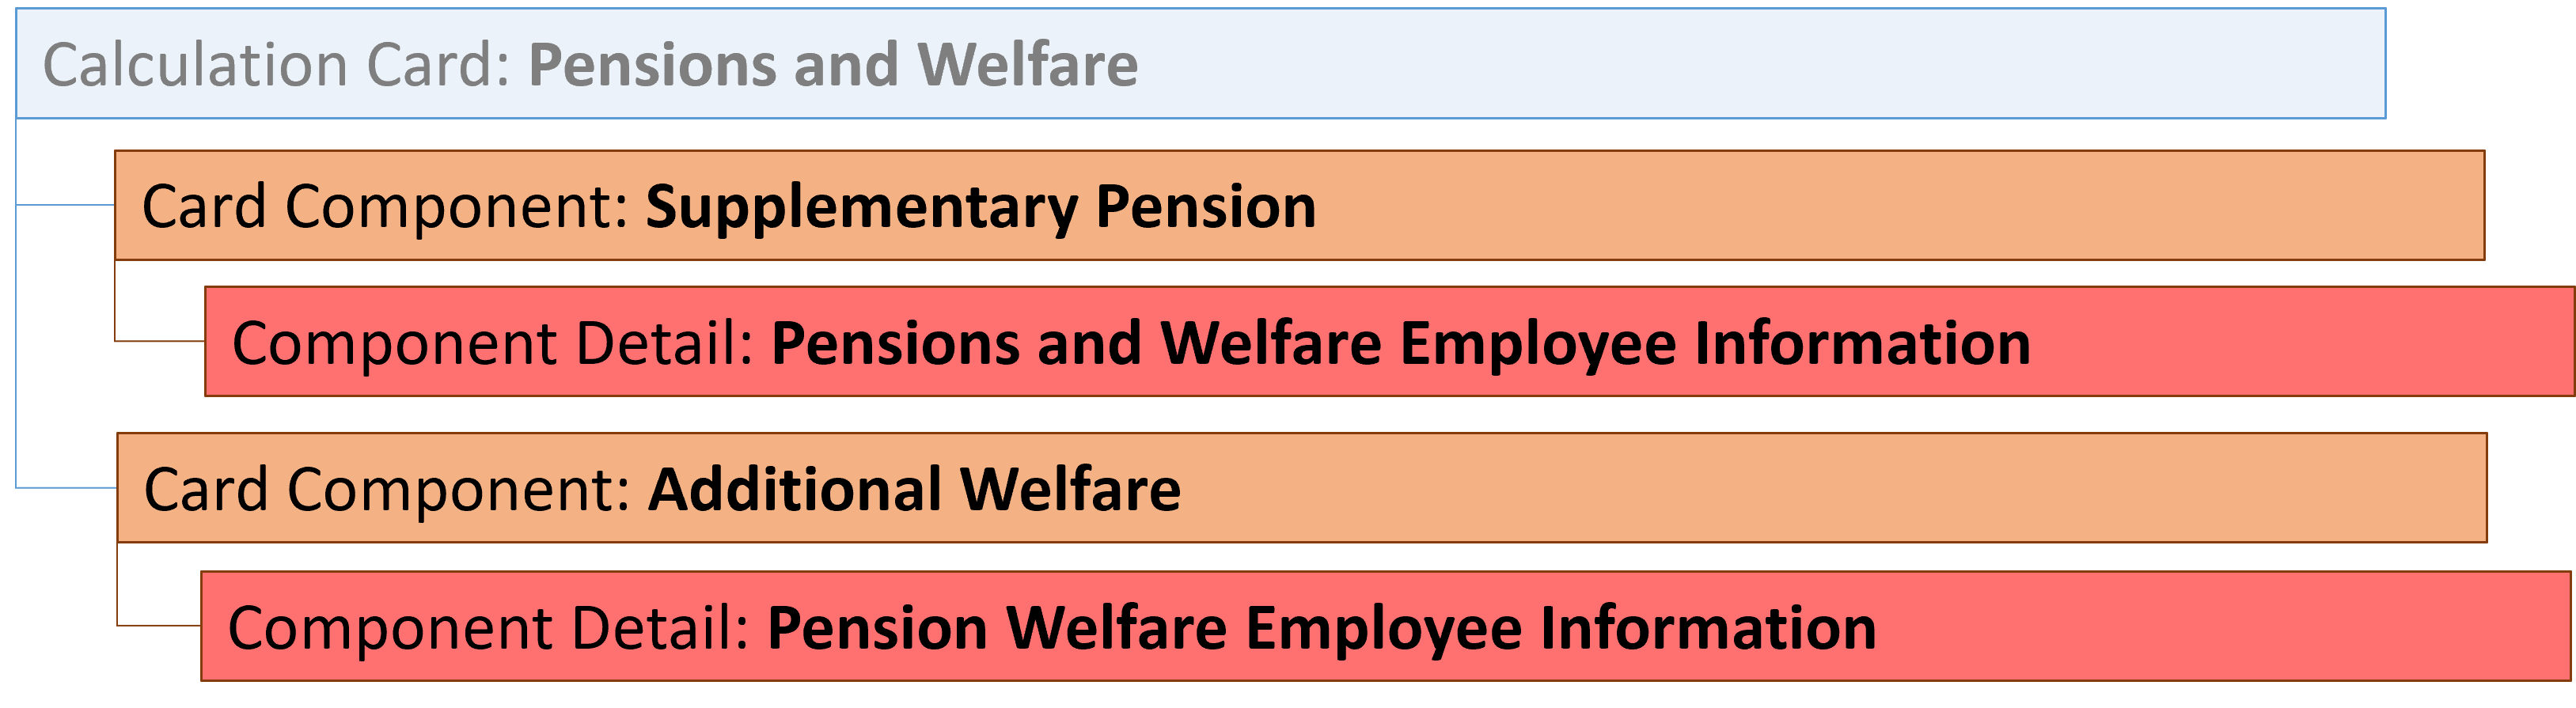 pension and welfare card